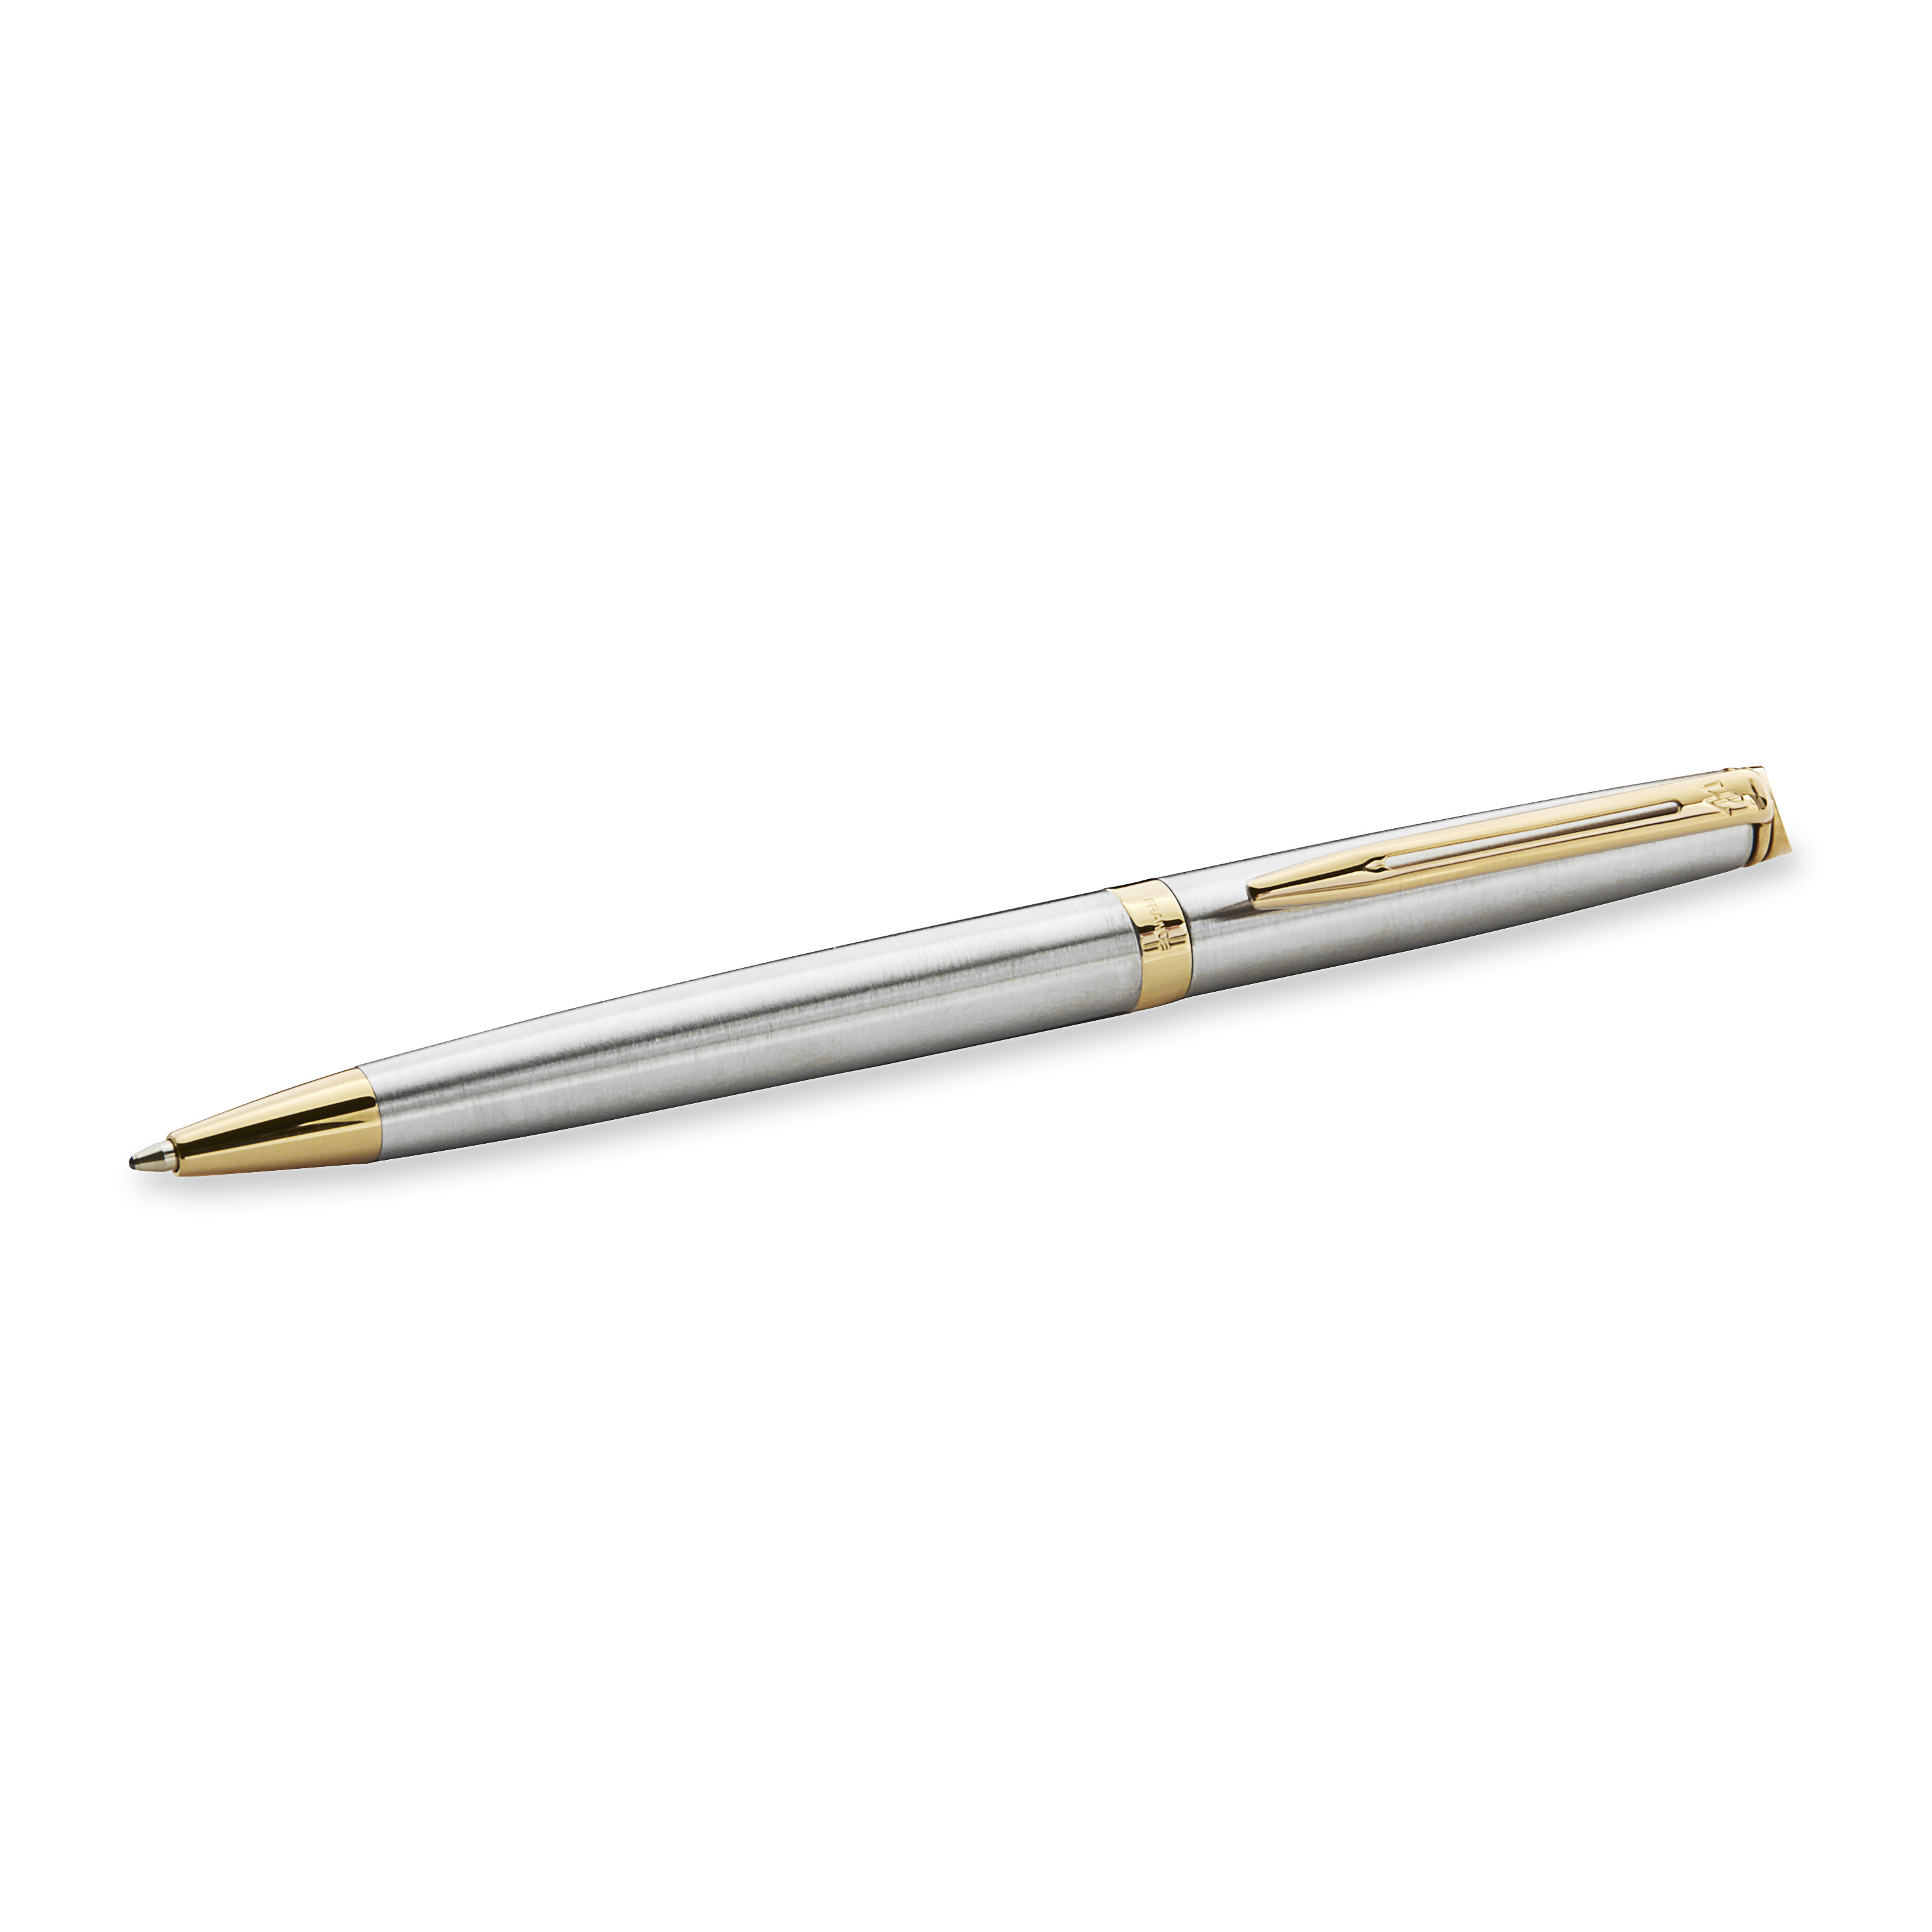 Waterman Hemisphere Stainless Steel Gold Trim Ballpoint - Pencraft the boutique